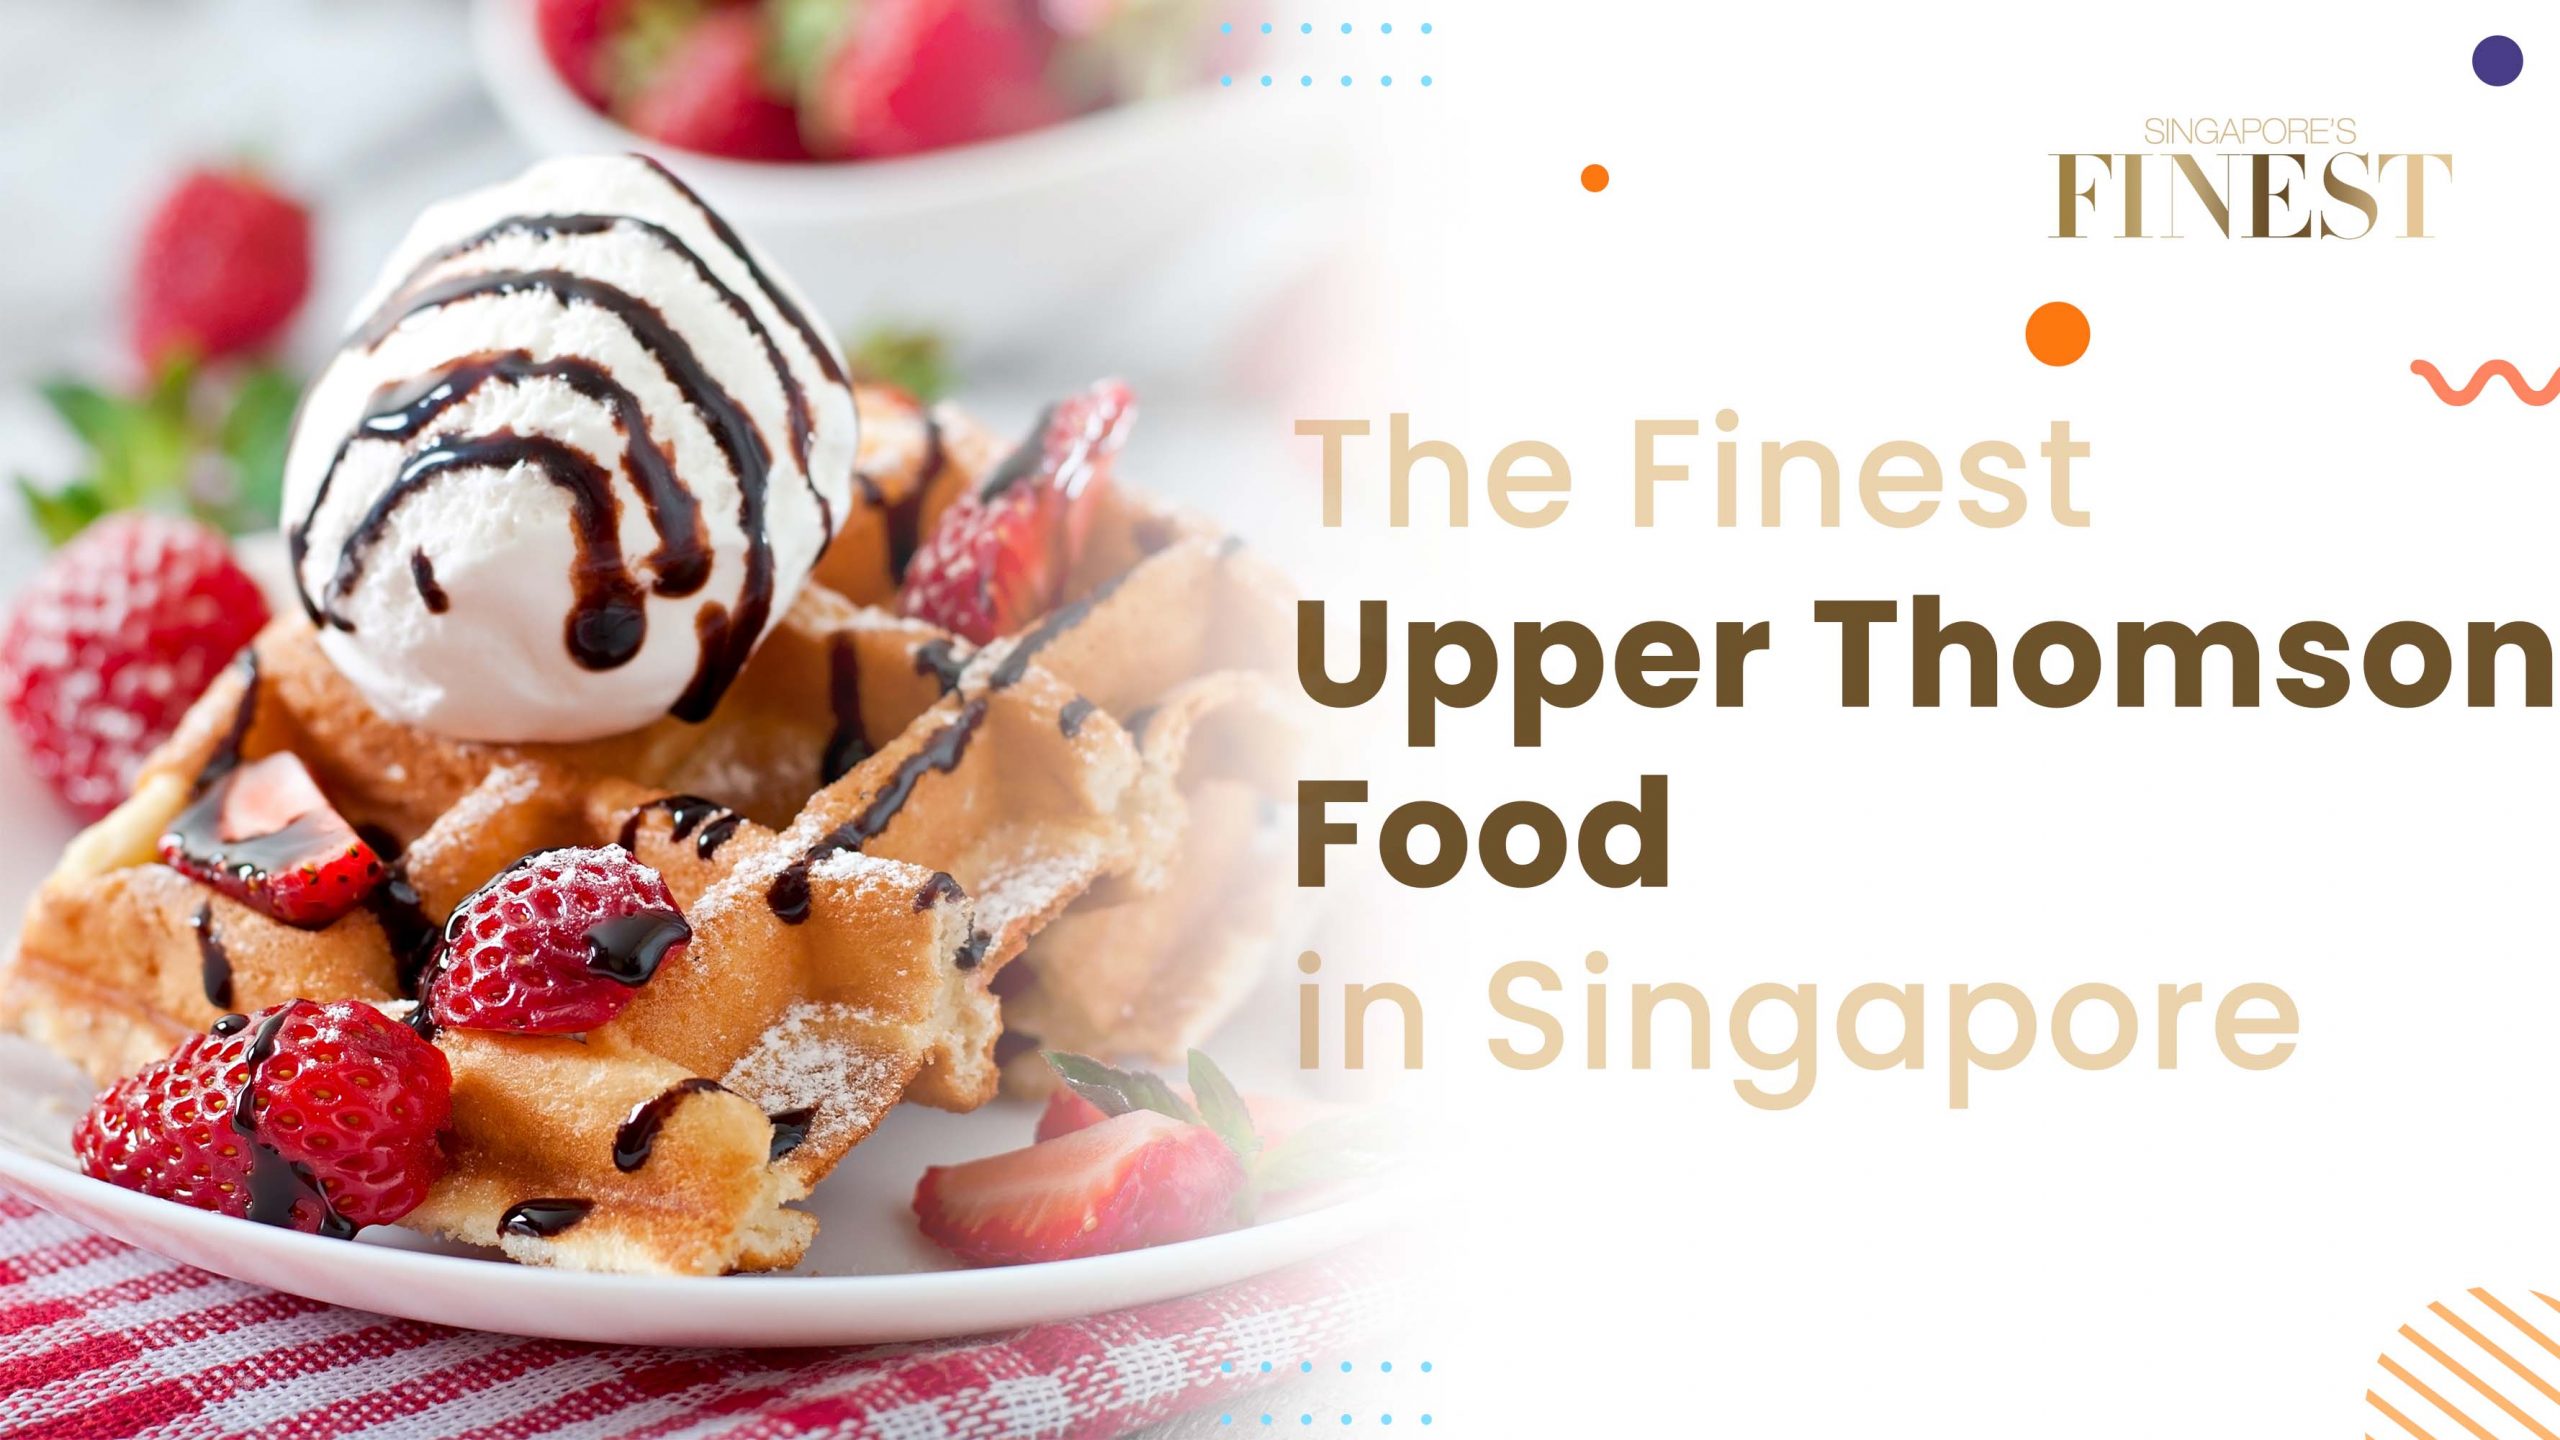 Finest Upper Thomson Food in Singapore